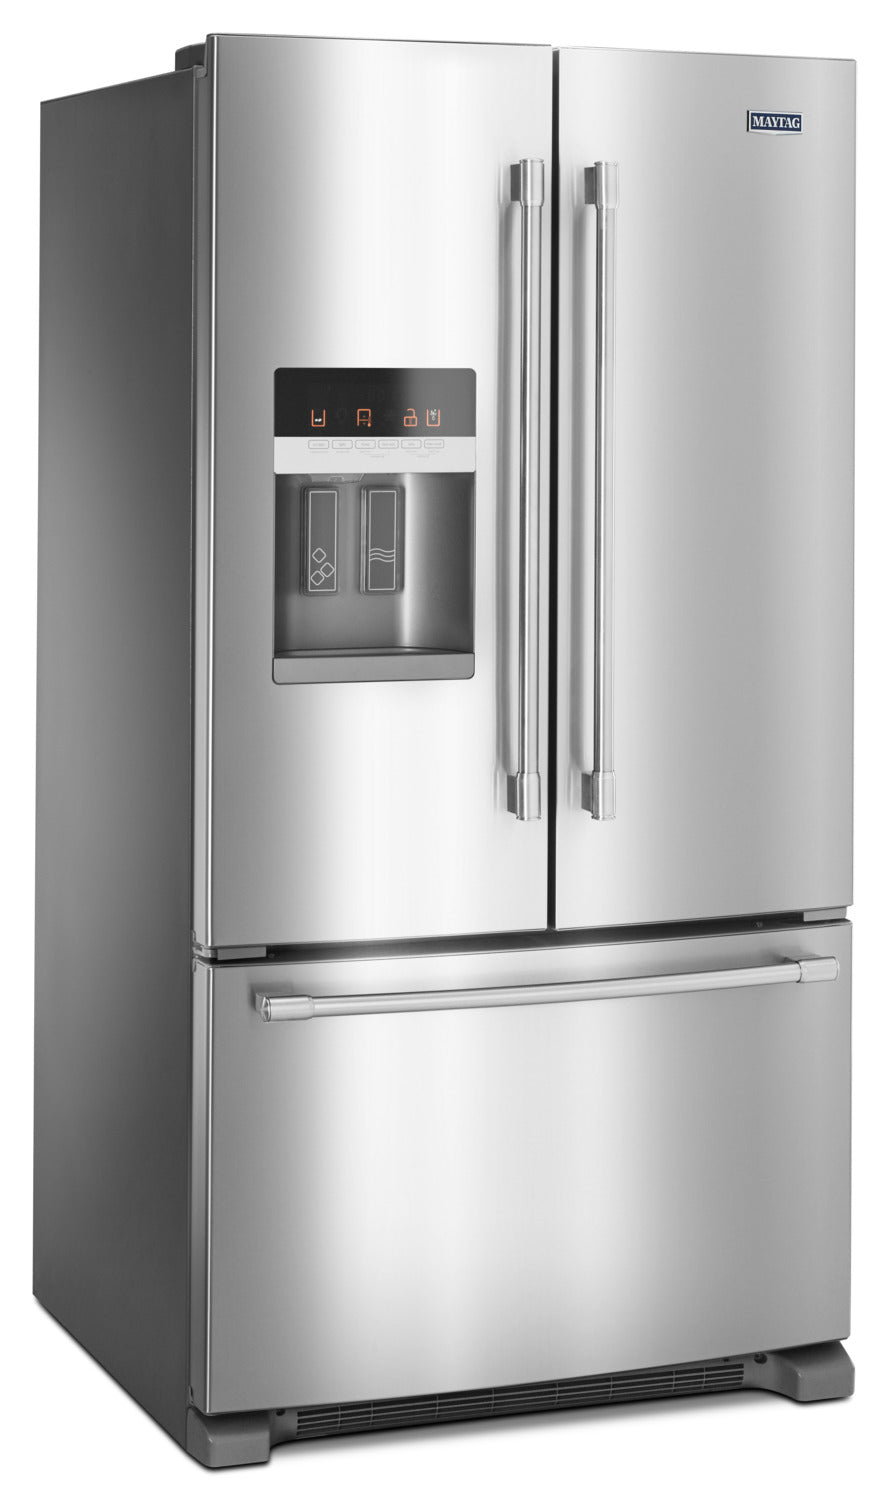 Maytag Stainless Steel French Door Refrigerator (25 Cu. Ft.) - MFI2570FEZ